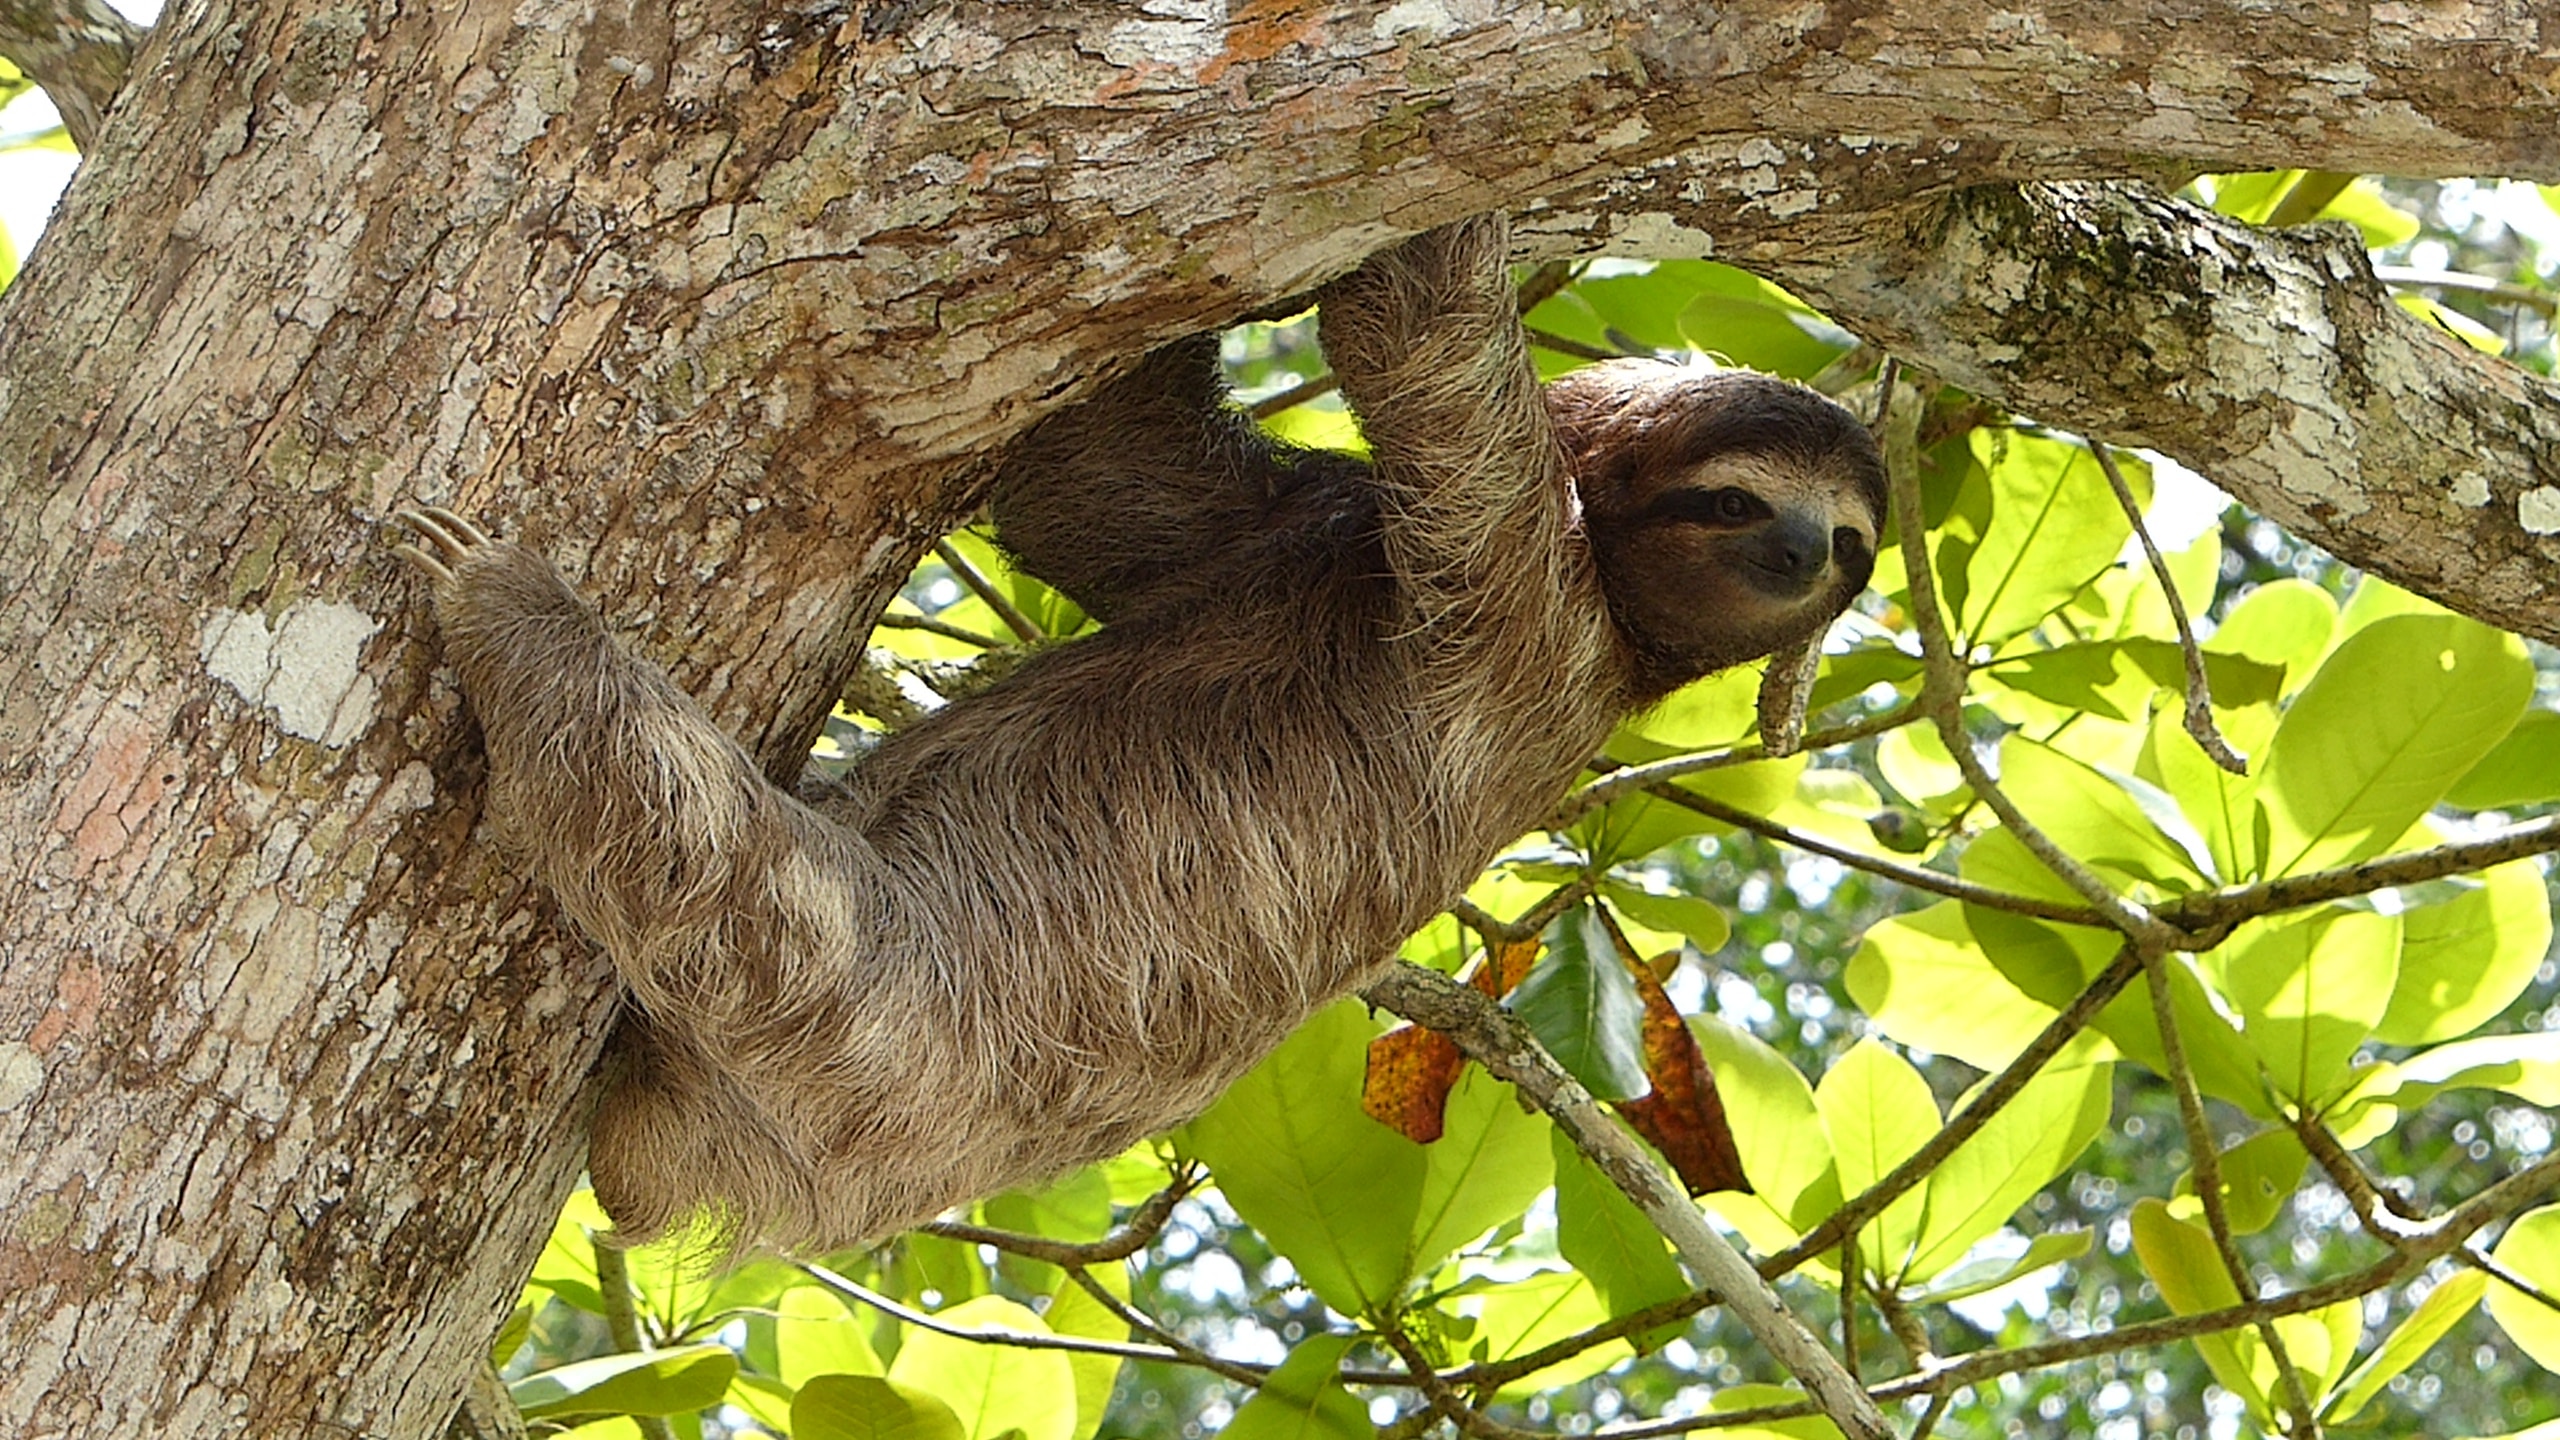 Sloths may be threatened by climate change, human sprawl after 64 million years of evolution